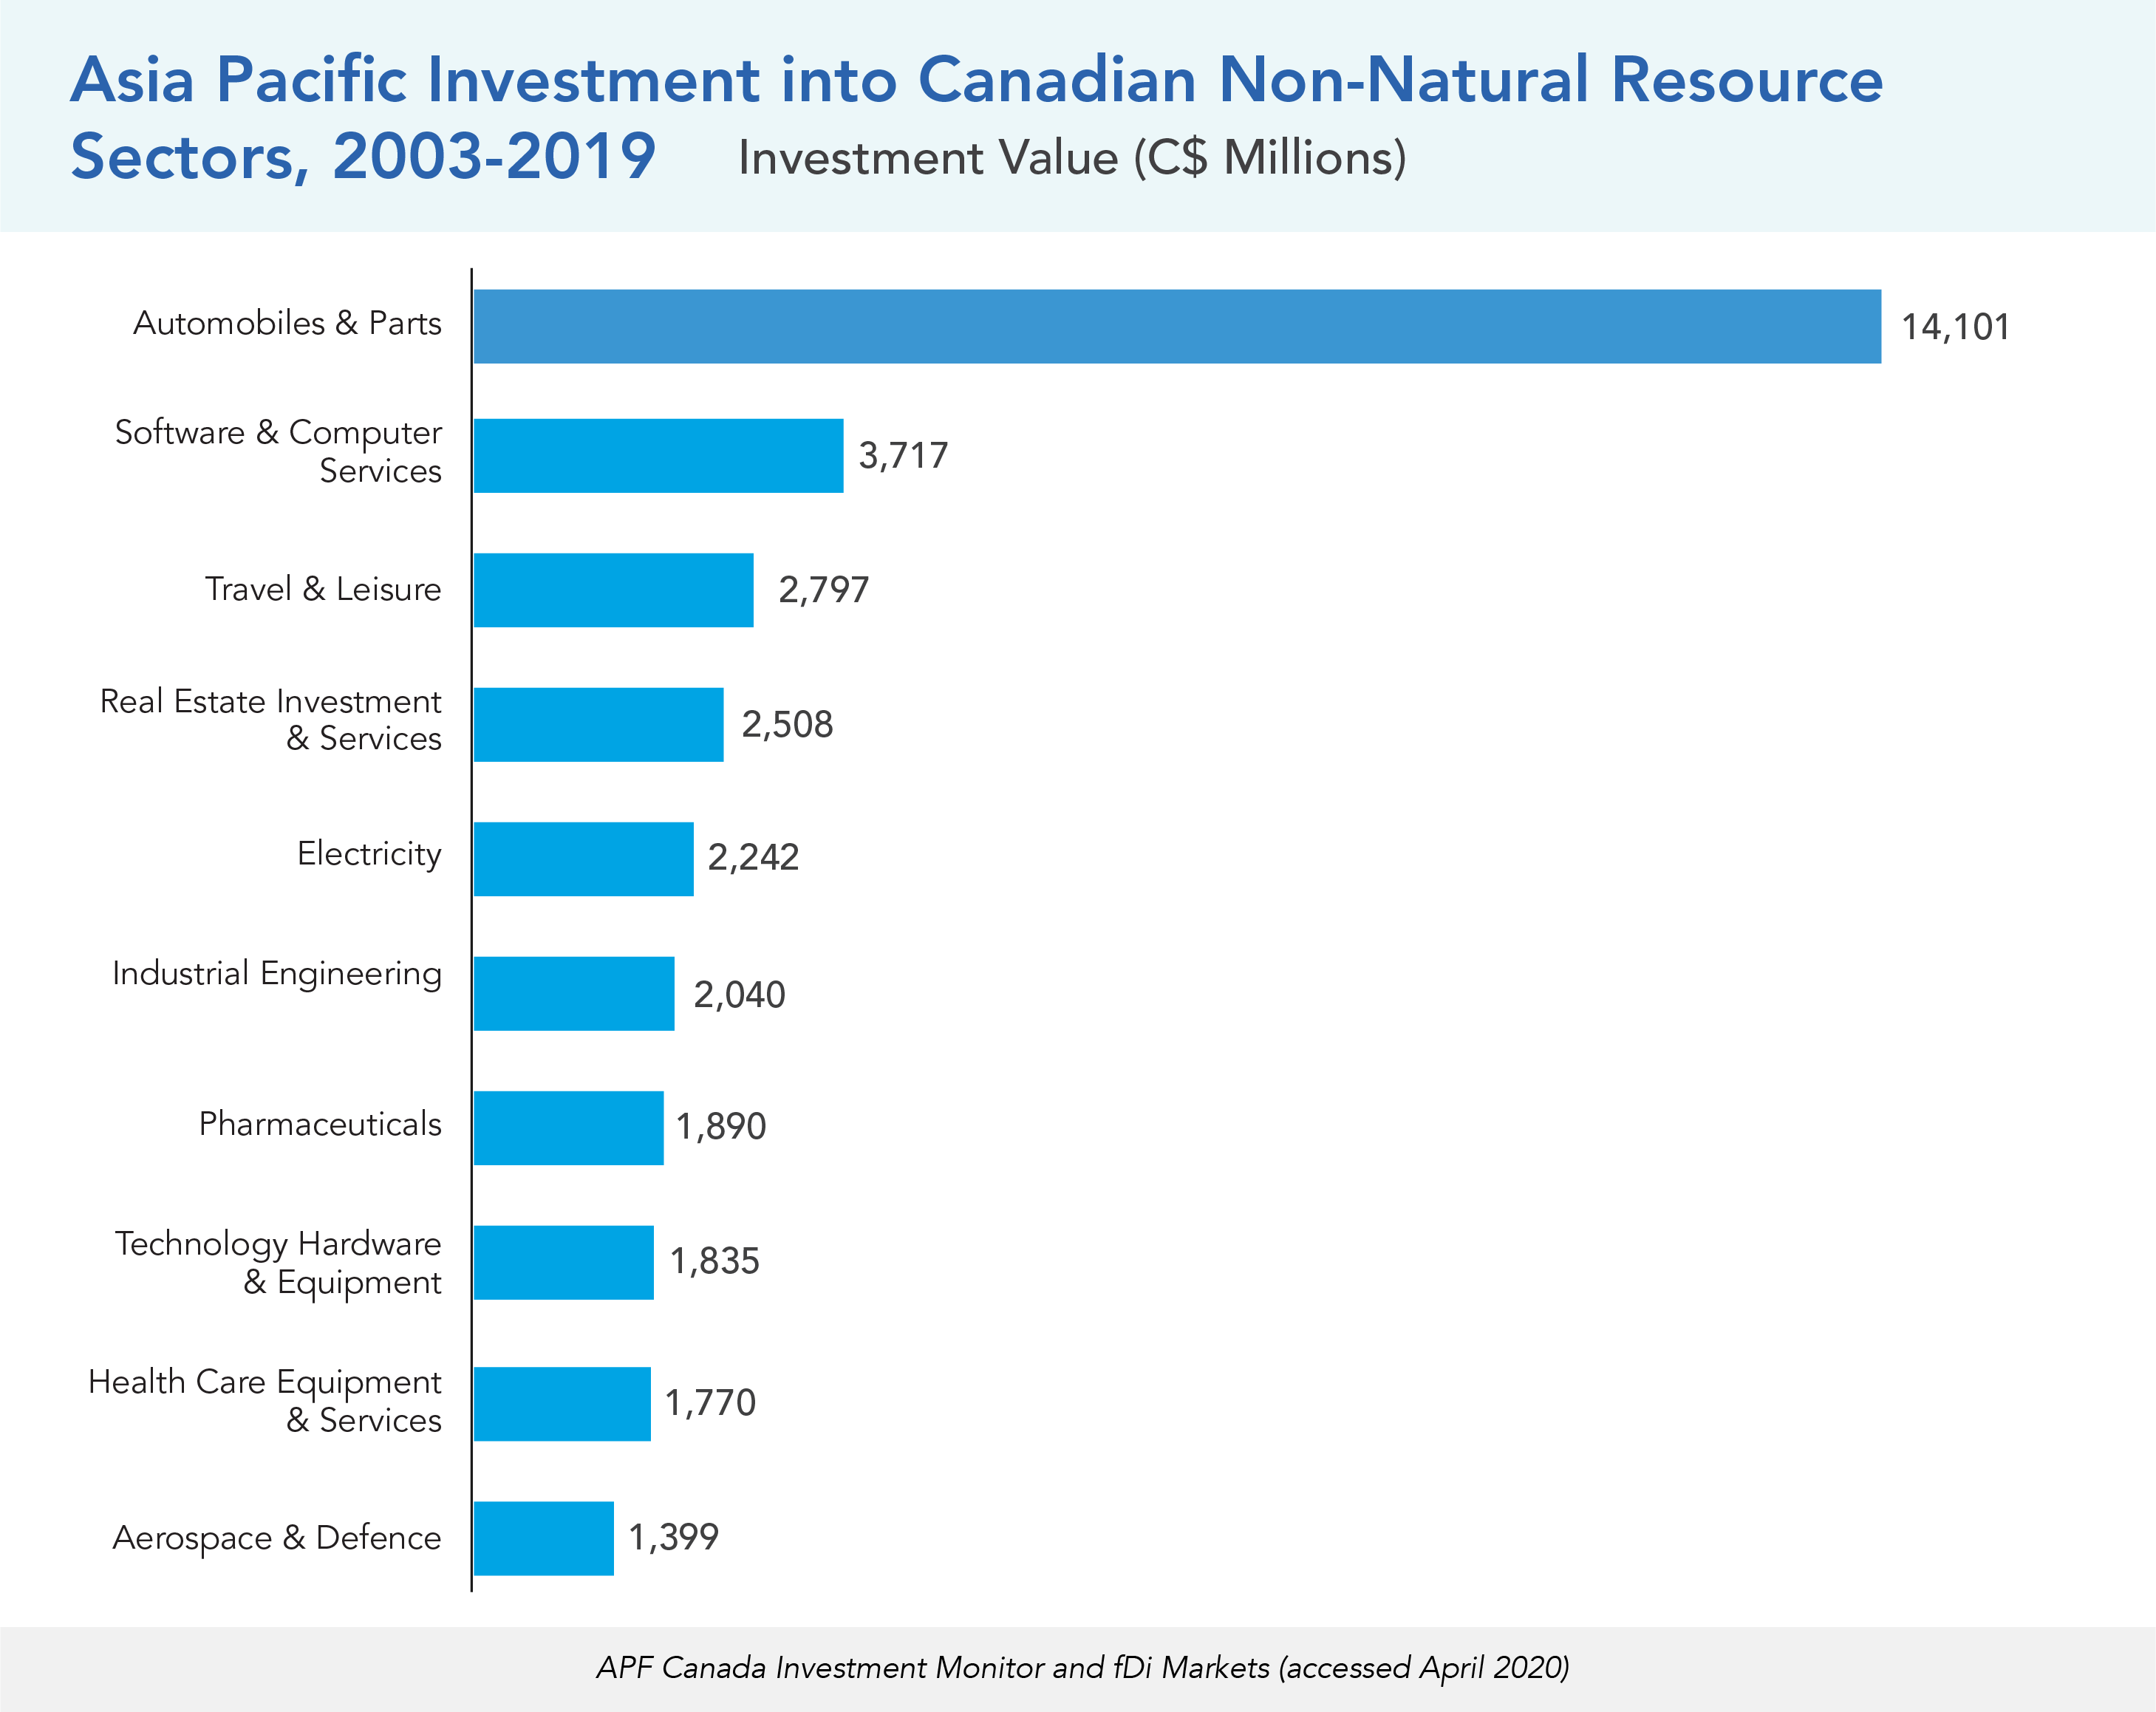 Asia Pacific Investment into Canadian Non-Natural Resource Sectors, 2003-2019